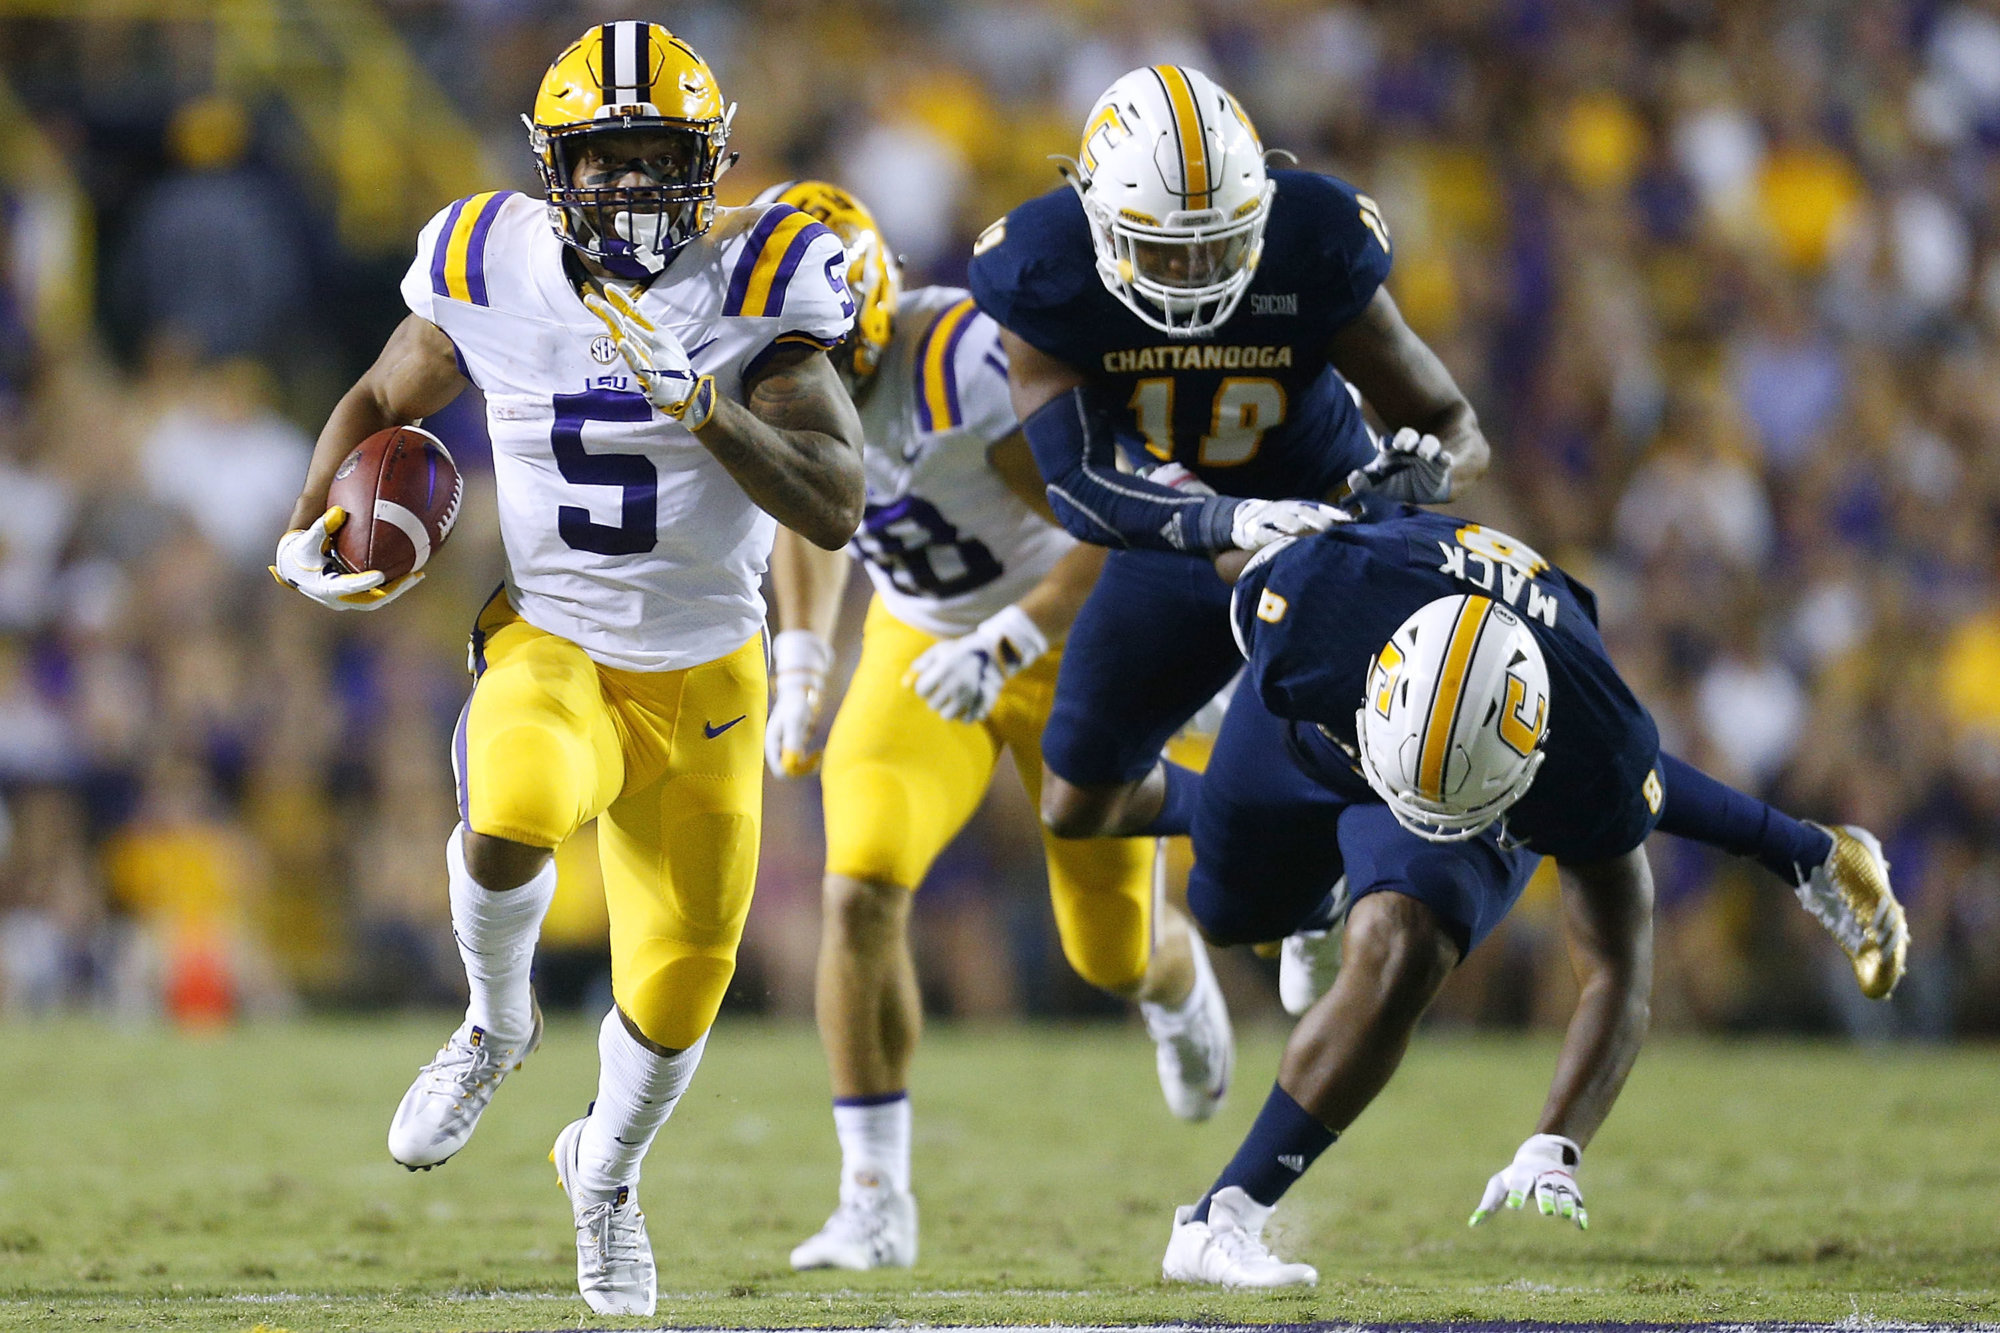 BATON ROUGE, LA - SEPTEMBER 09: Derrius Guice #5 of the LSU Tigers runs with the ball during the first half of a game against the Chattanooga Mocs at Tiger Stadium on September 9, 2017 in Baton Rouge, Louisiana.  (Photo by Jonathan Bachman/Getty Images)